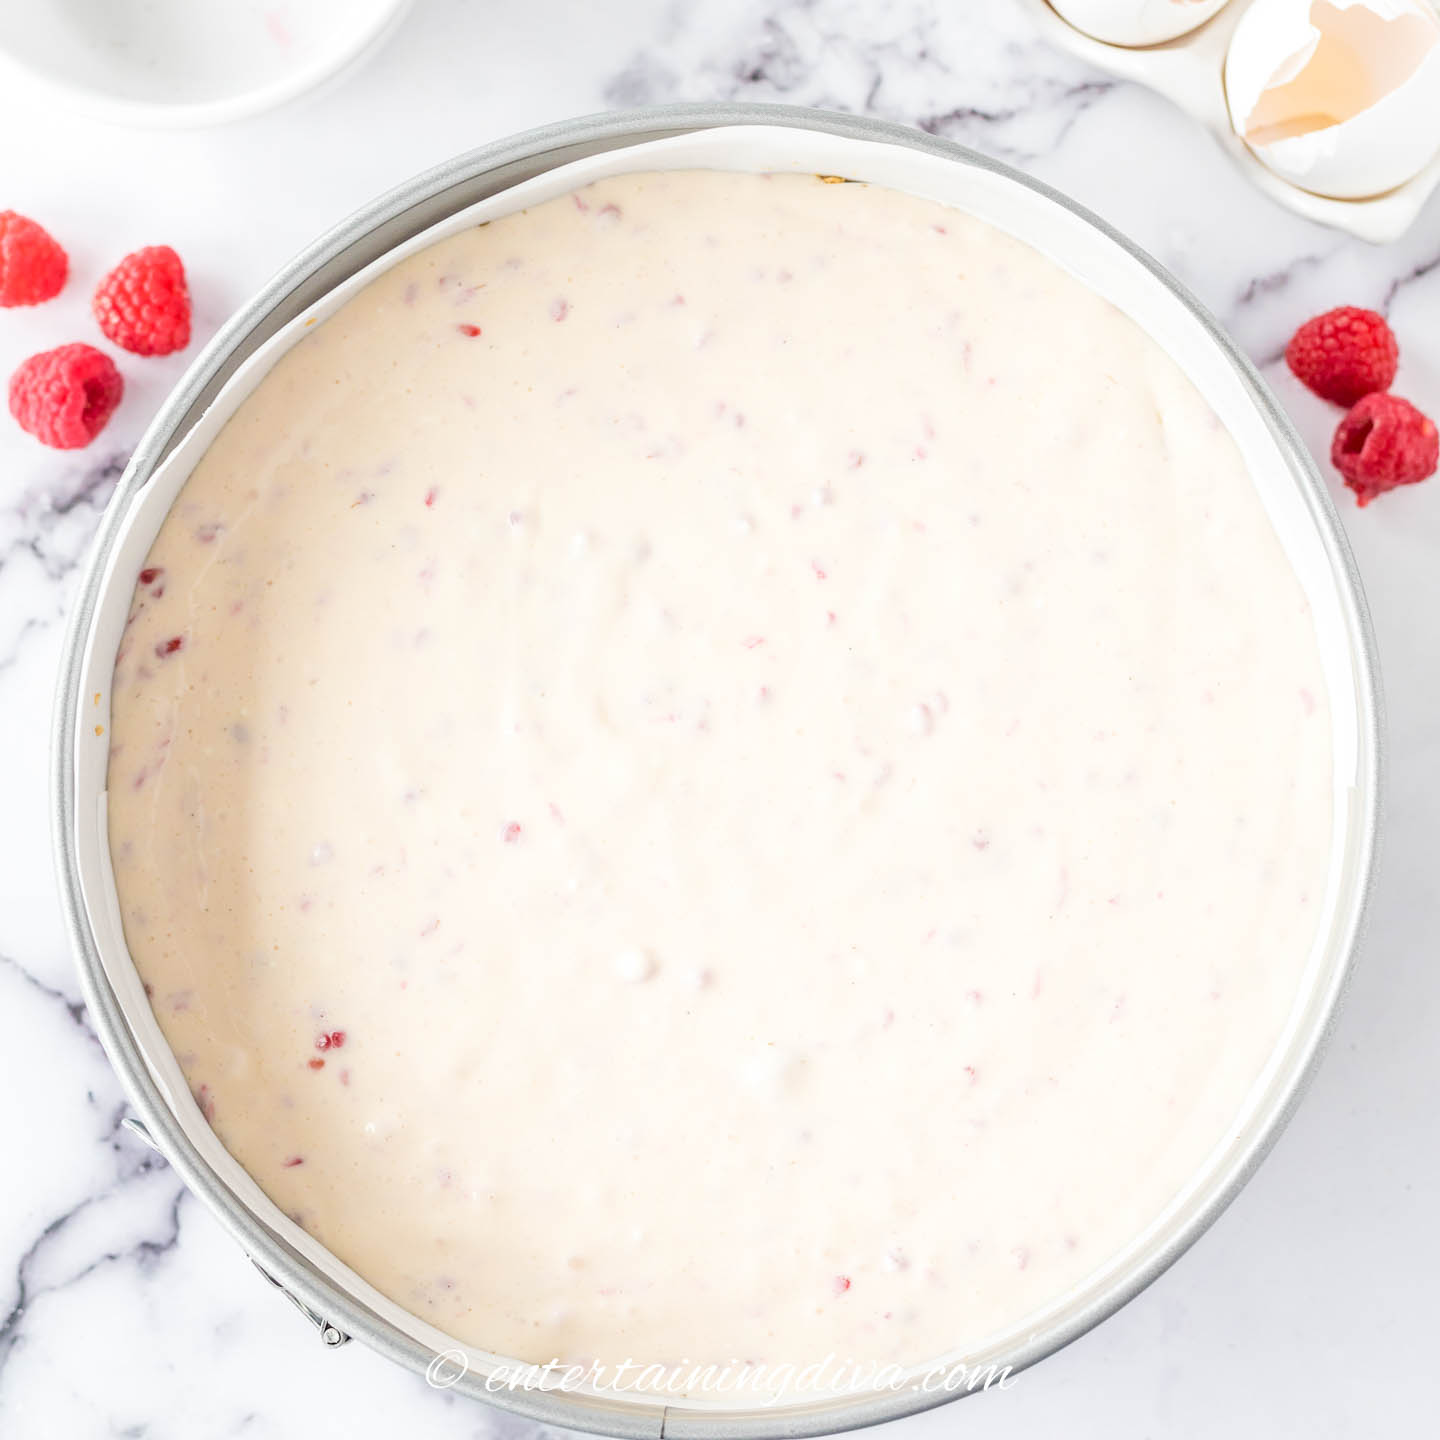 raspberry cheesecake batter in a springform pan before baking